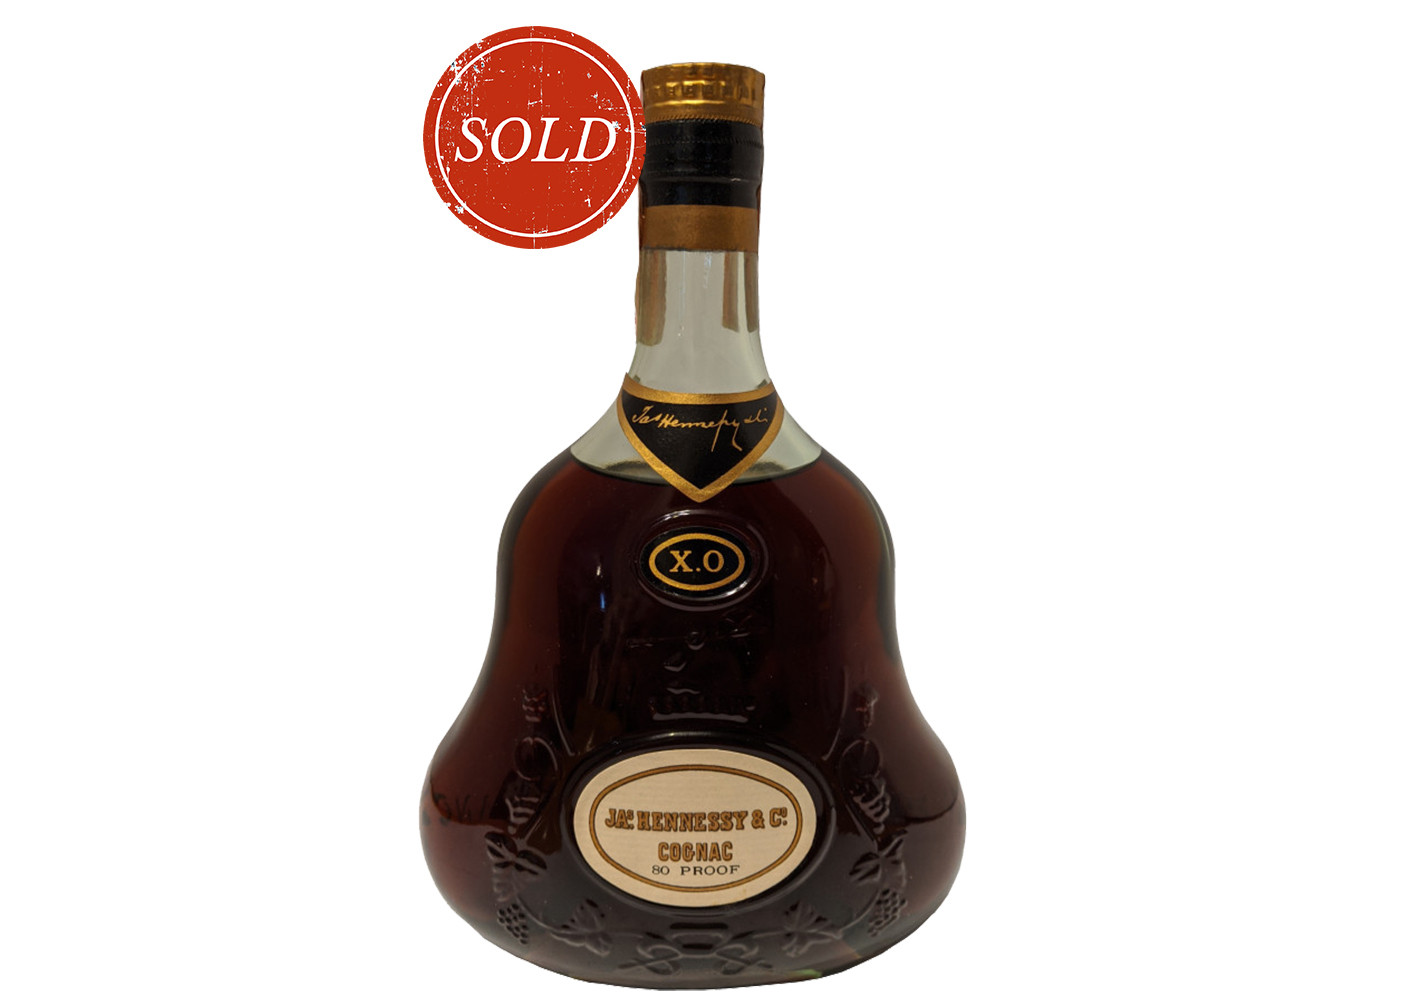 Where to buy Hennessy 'James Hennessy' X.O. Cognac, France